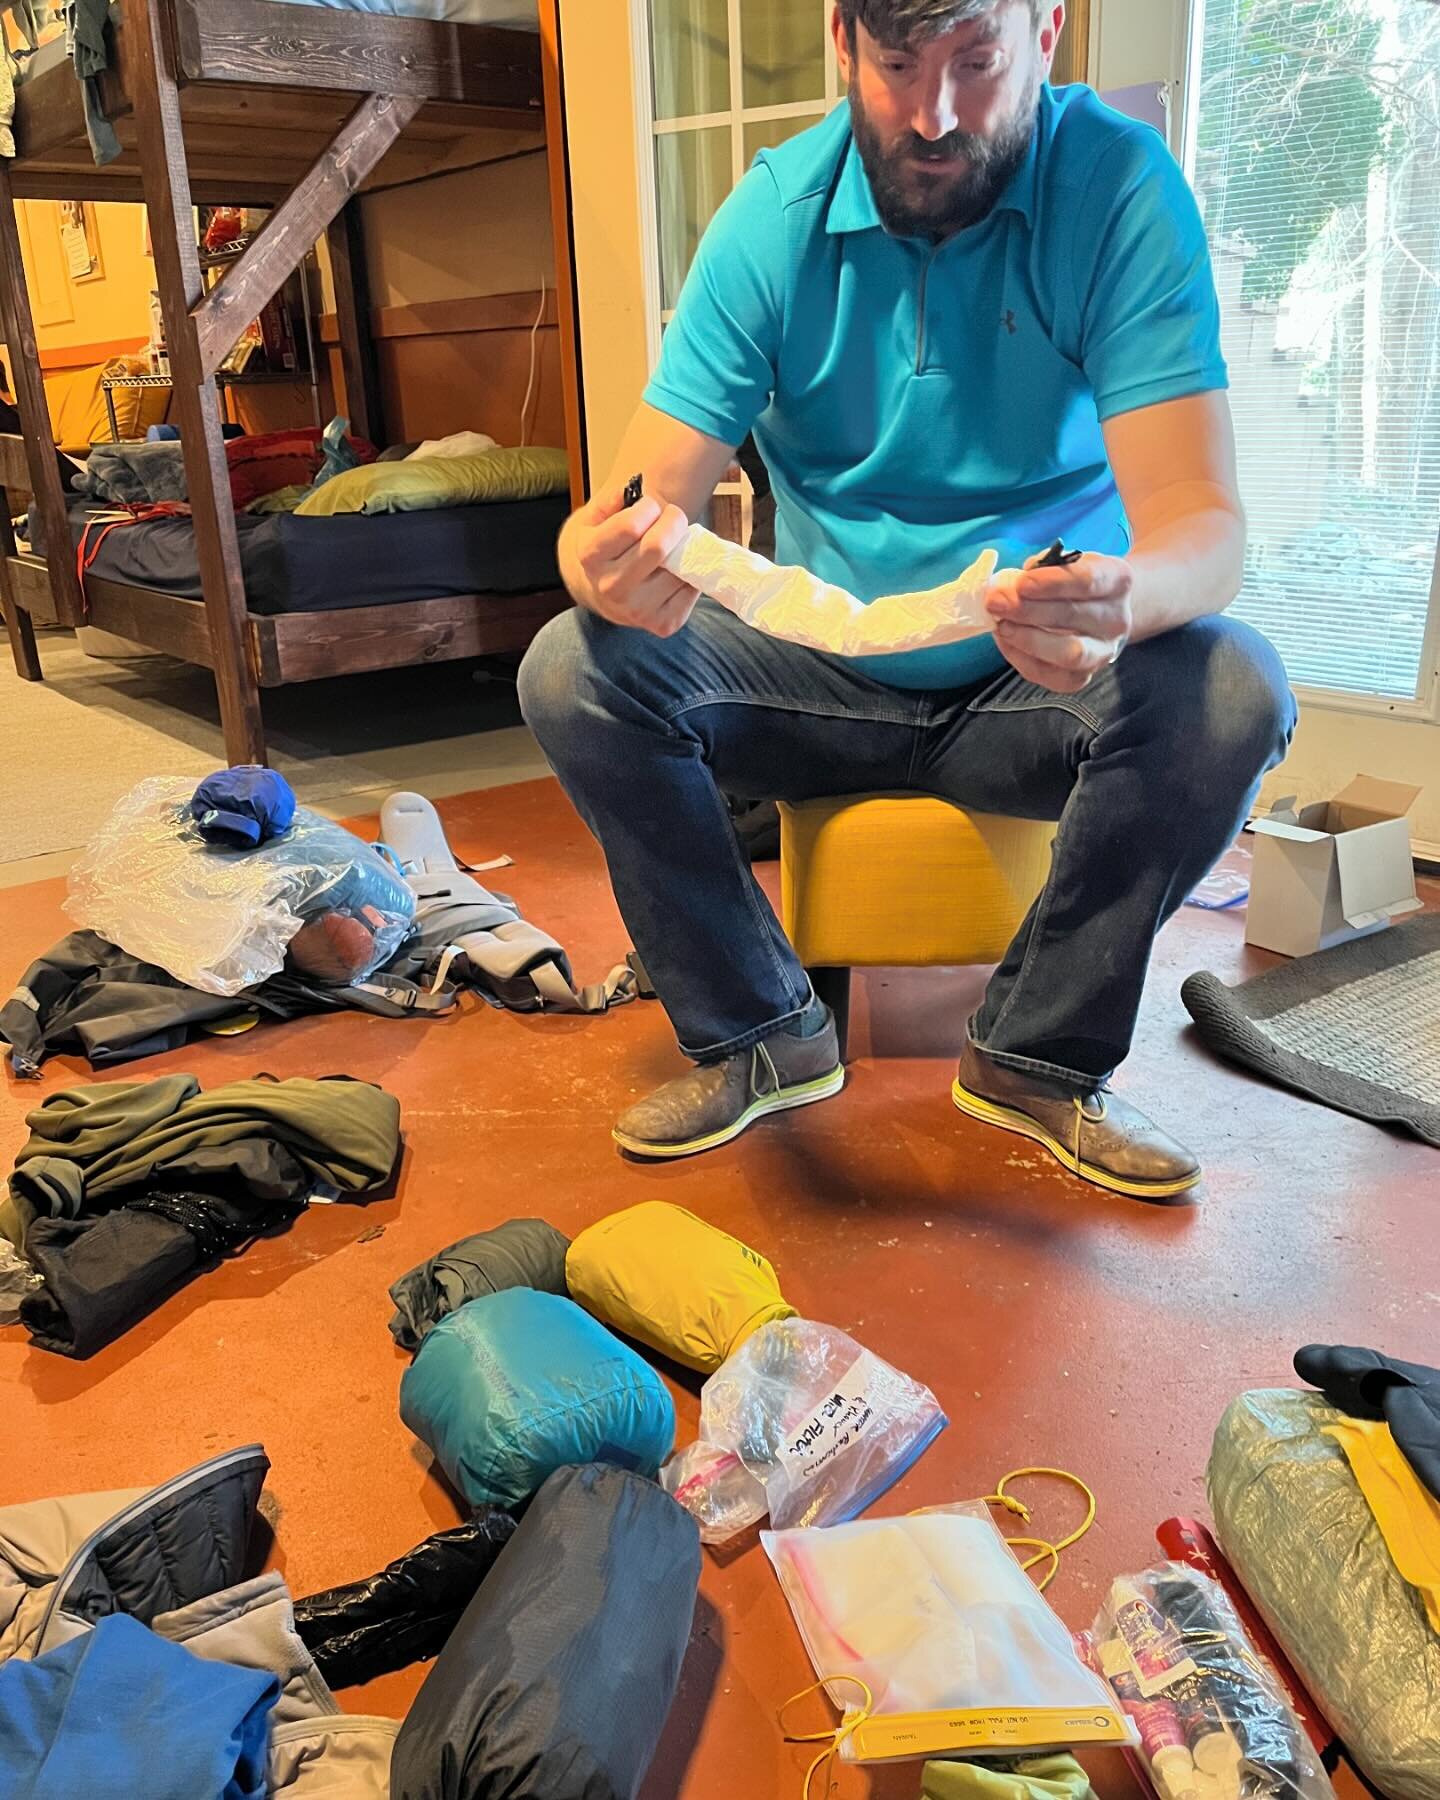 Today in hostel life: lots o&rsquo; shuttles and slackpacking, one departure (Ethan, who got trail magic!) and @unfilteredhikes helping Yosemite Sam shave a whopping 3.8lbs off his pack weight. We have a full house of slackpackers tonight and tomorro